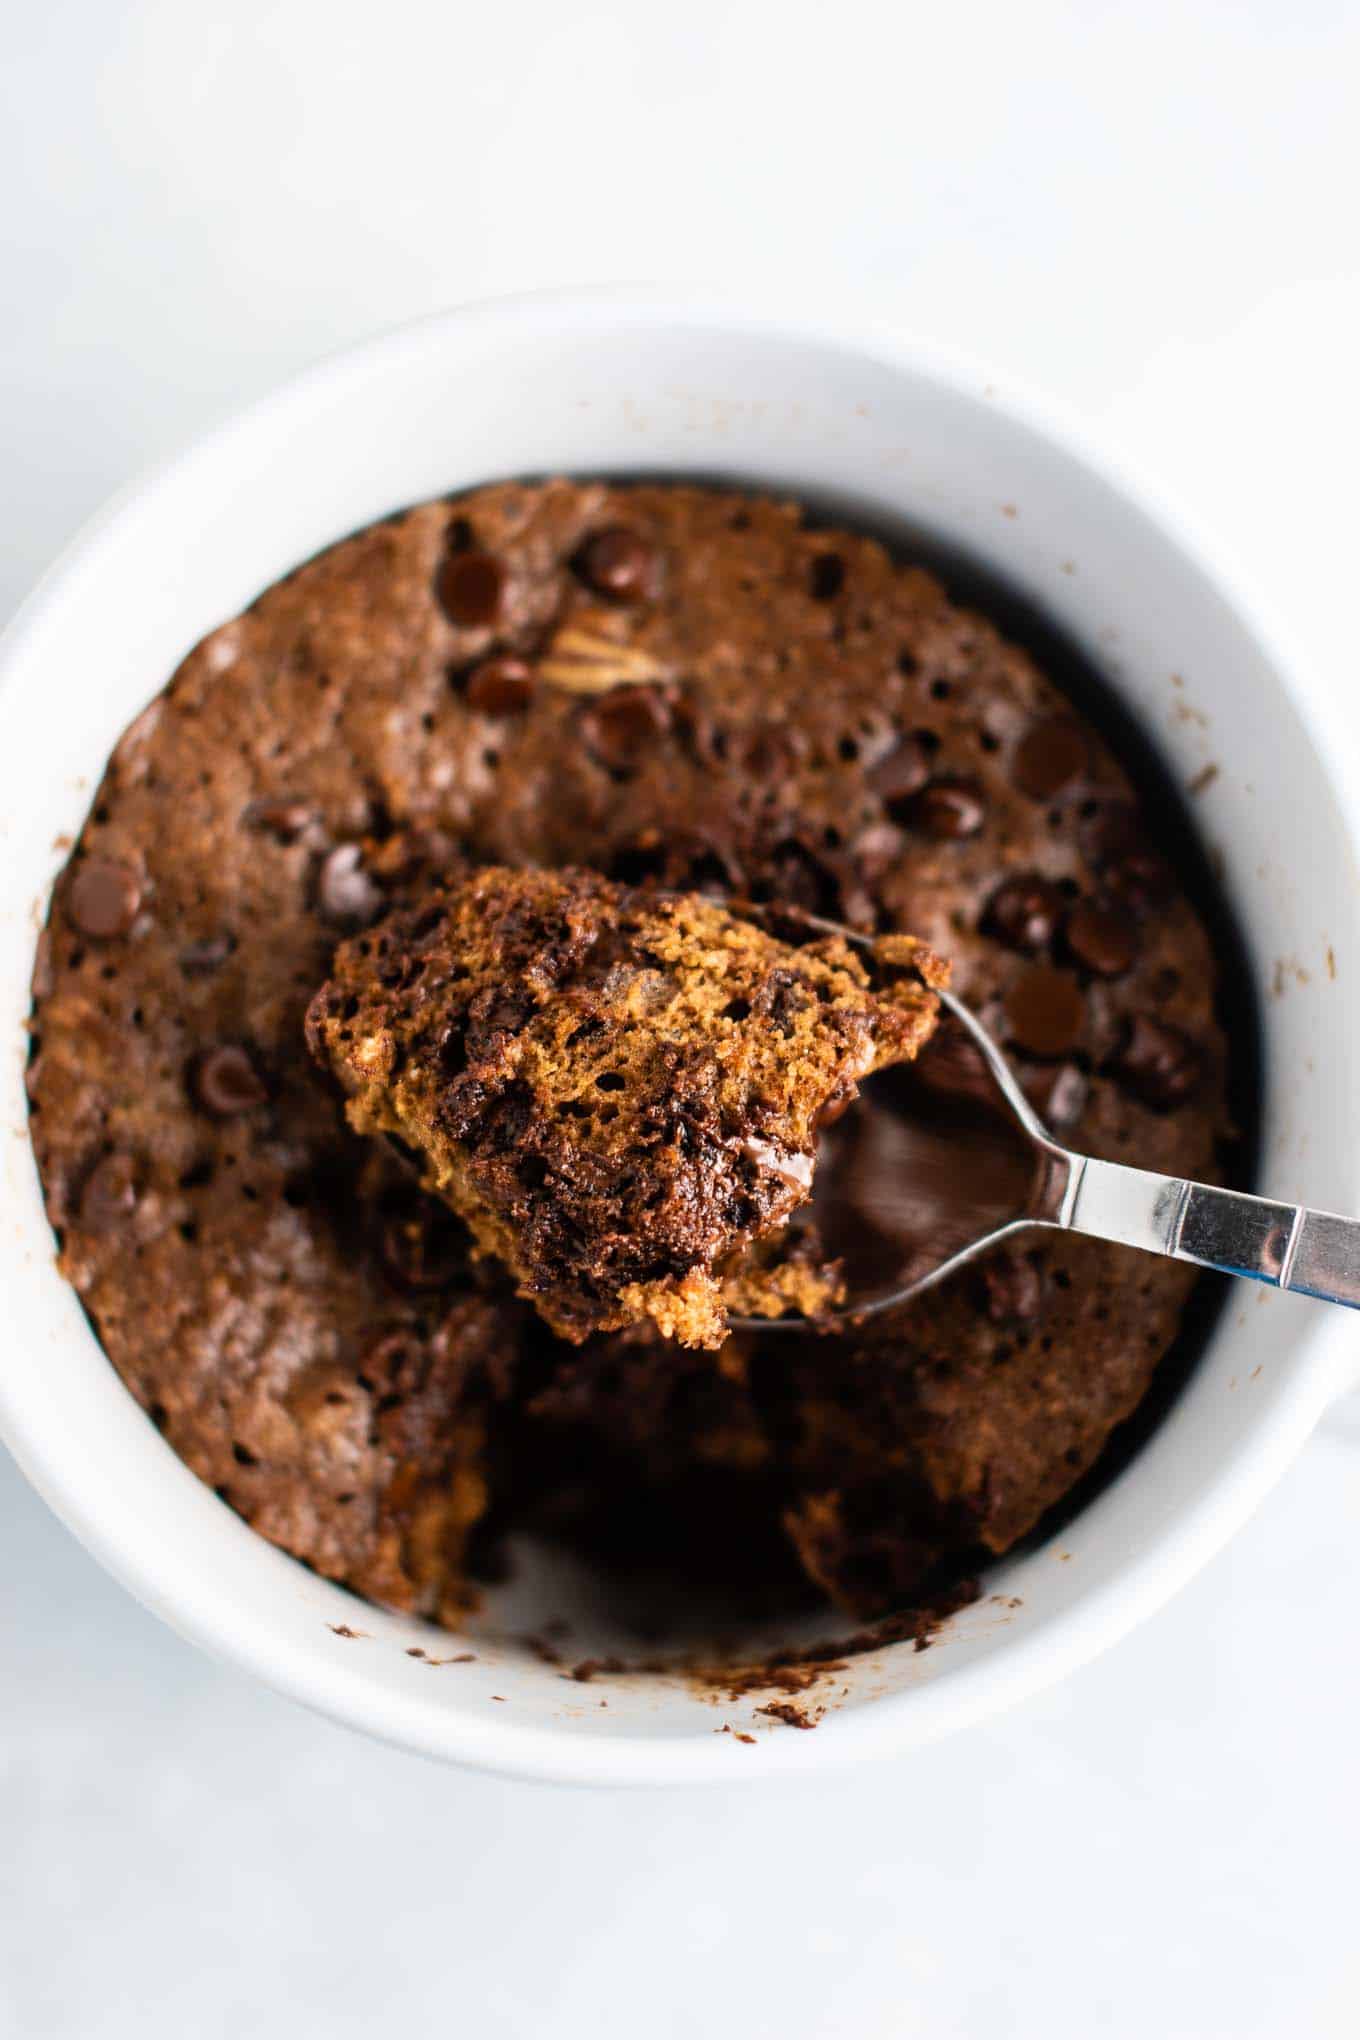 Gluten free chocolate mug cake made with easy to find flours. Perfectly fluffy and so decadent - serve with ice cream!